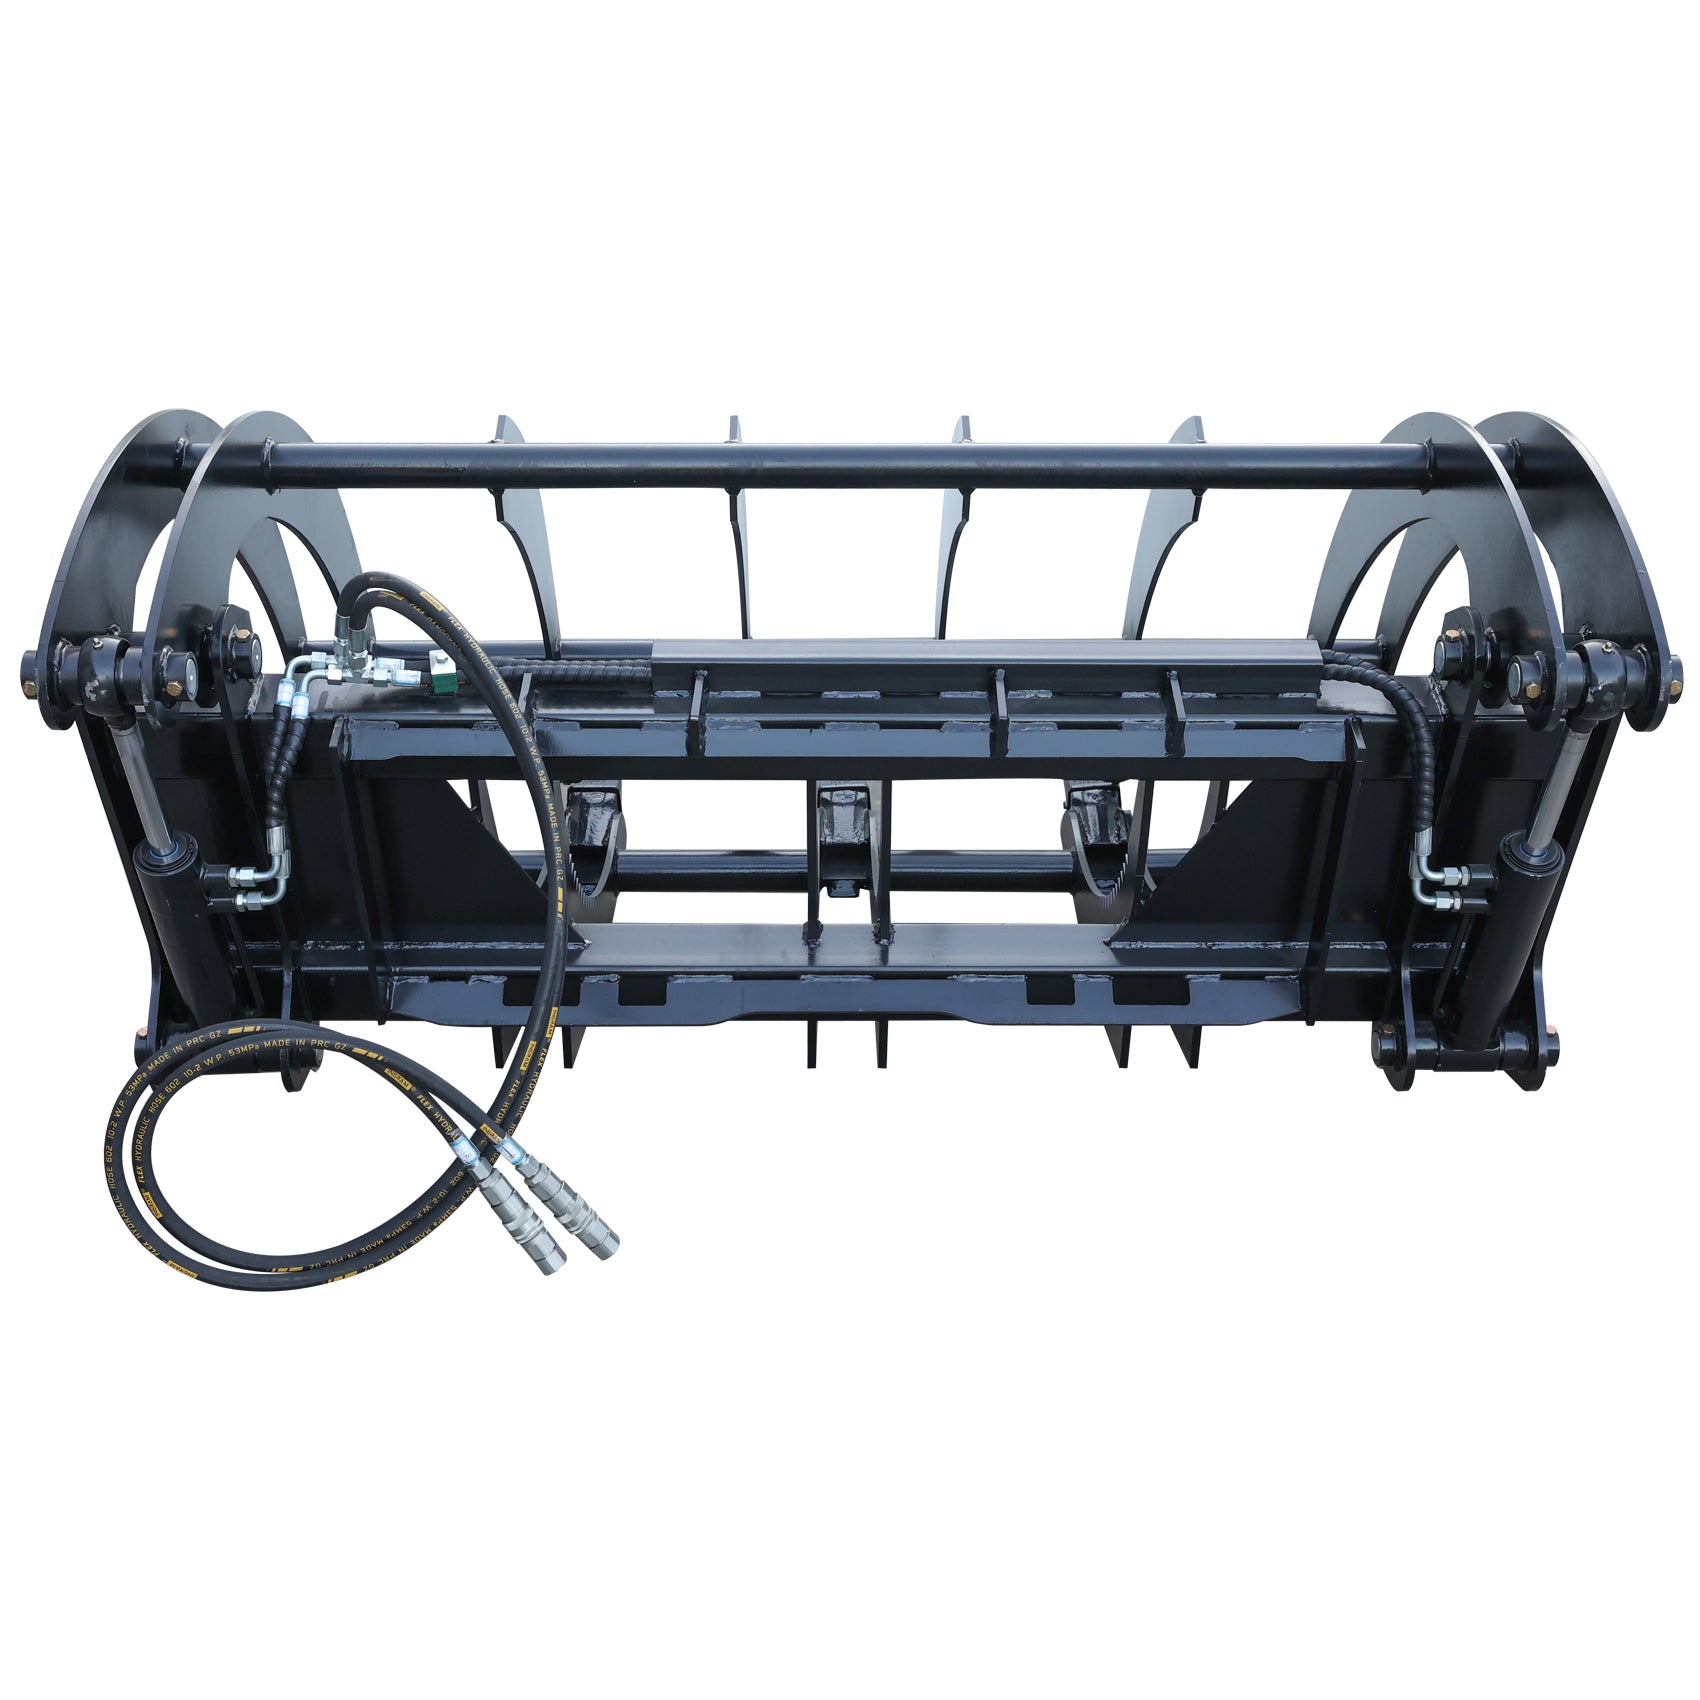 Landy Attachments 72'' Extreme Skid Steer Root Grapple Rake Universal Mount